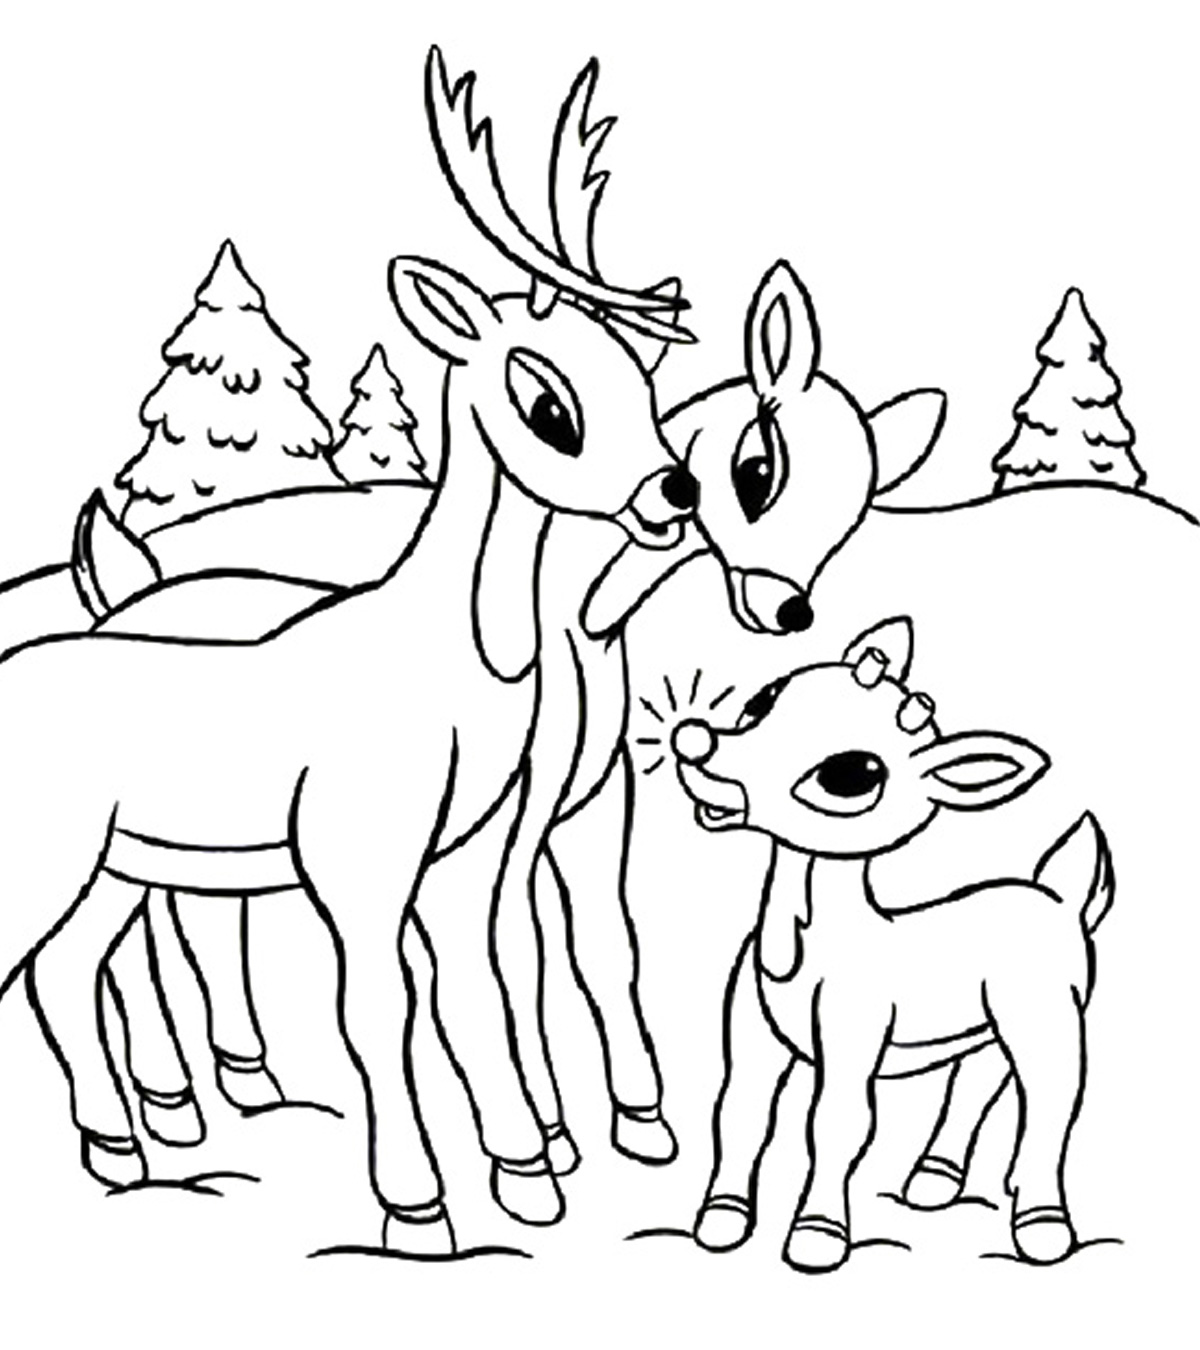 20 Best Rudolph The Red Nosed Reindeer Coloring Pages For